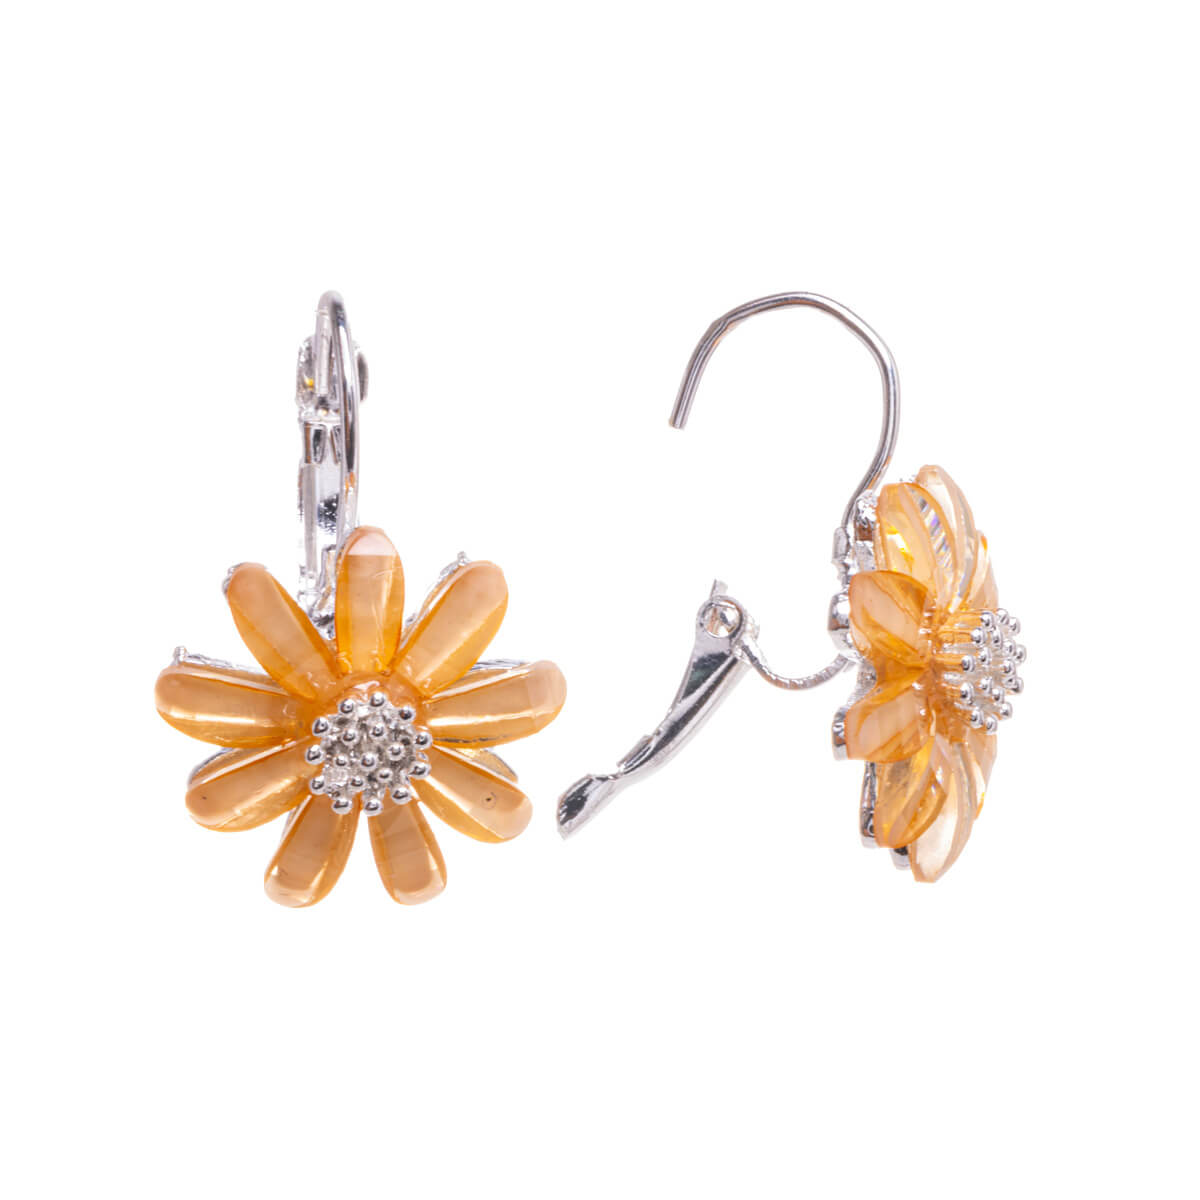 Hanging flower earring with hook